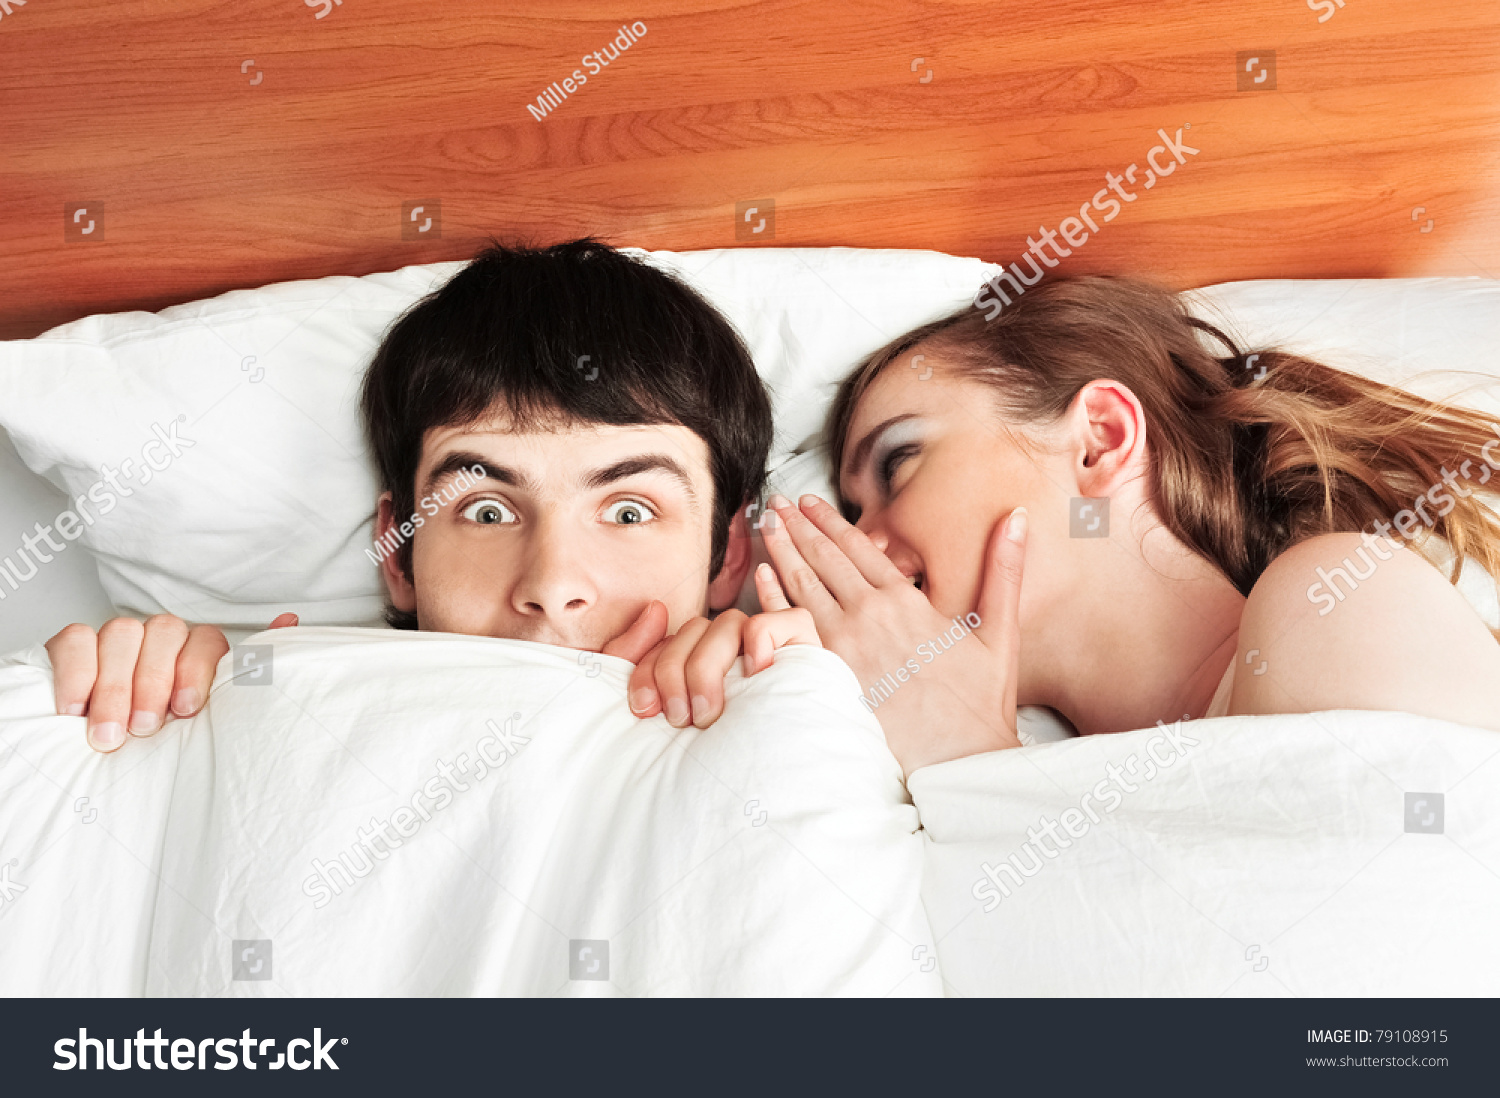 Young Man Woman Bed Couple Stock Photo 79108915 - Shutterstock-3322